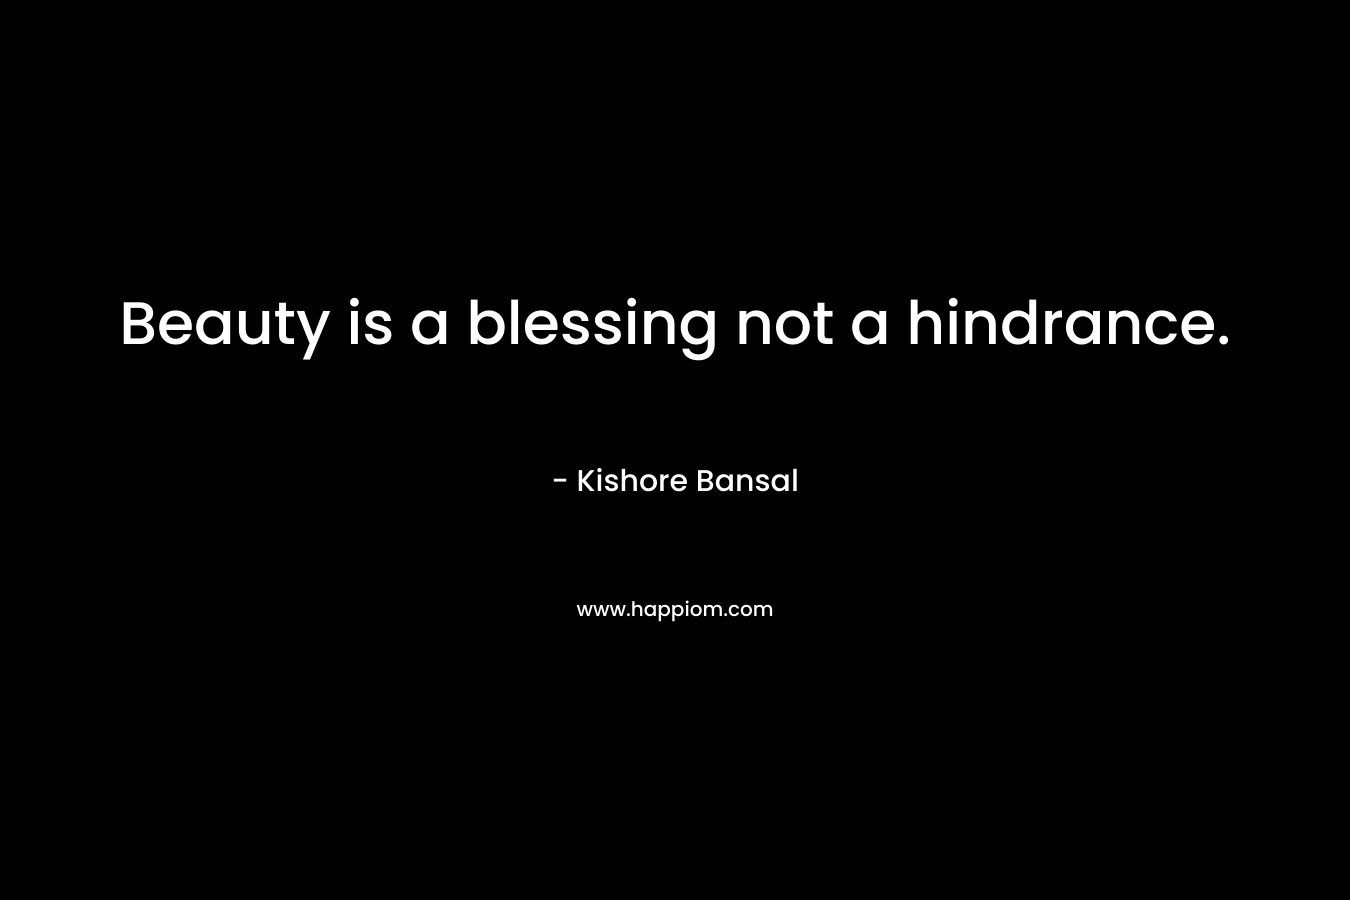 Beauty is a blessing not a hindrance. – Kishore Bansal